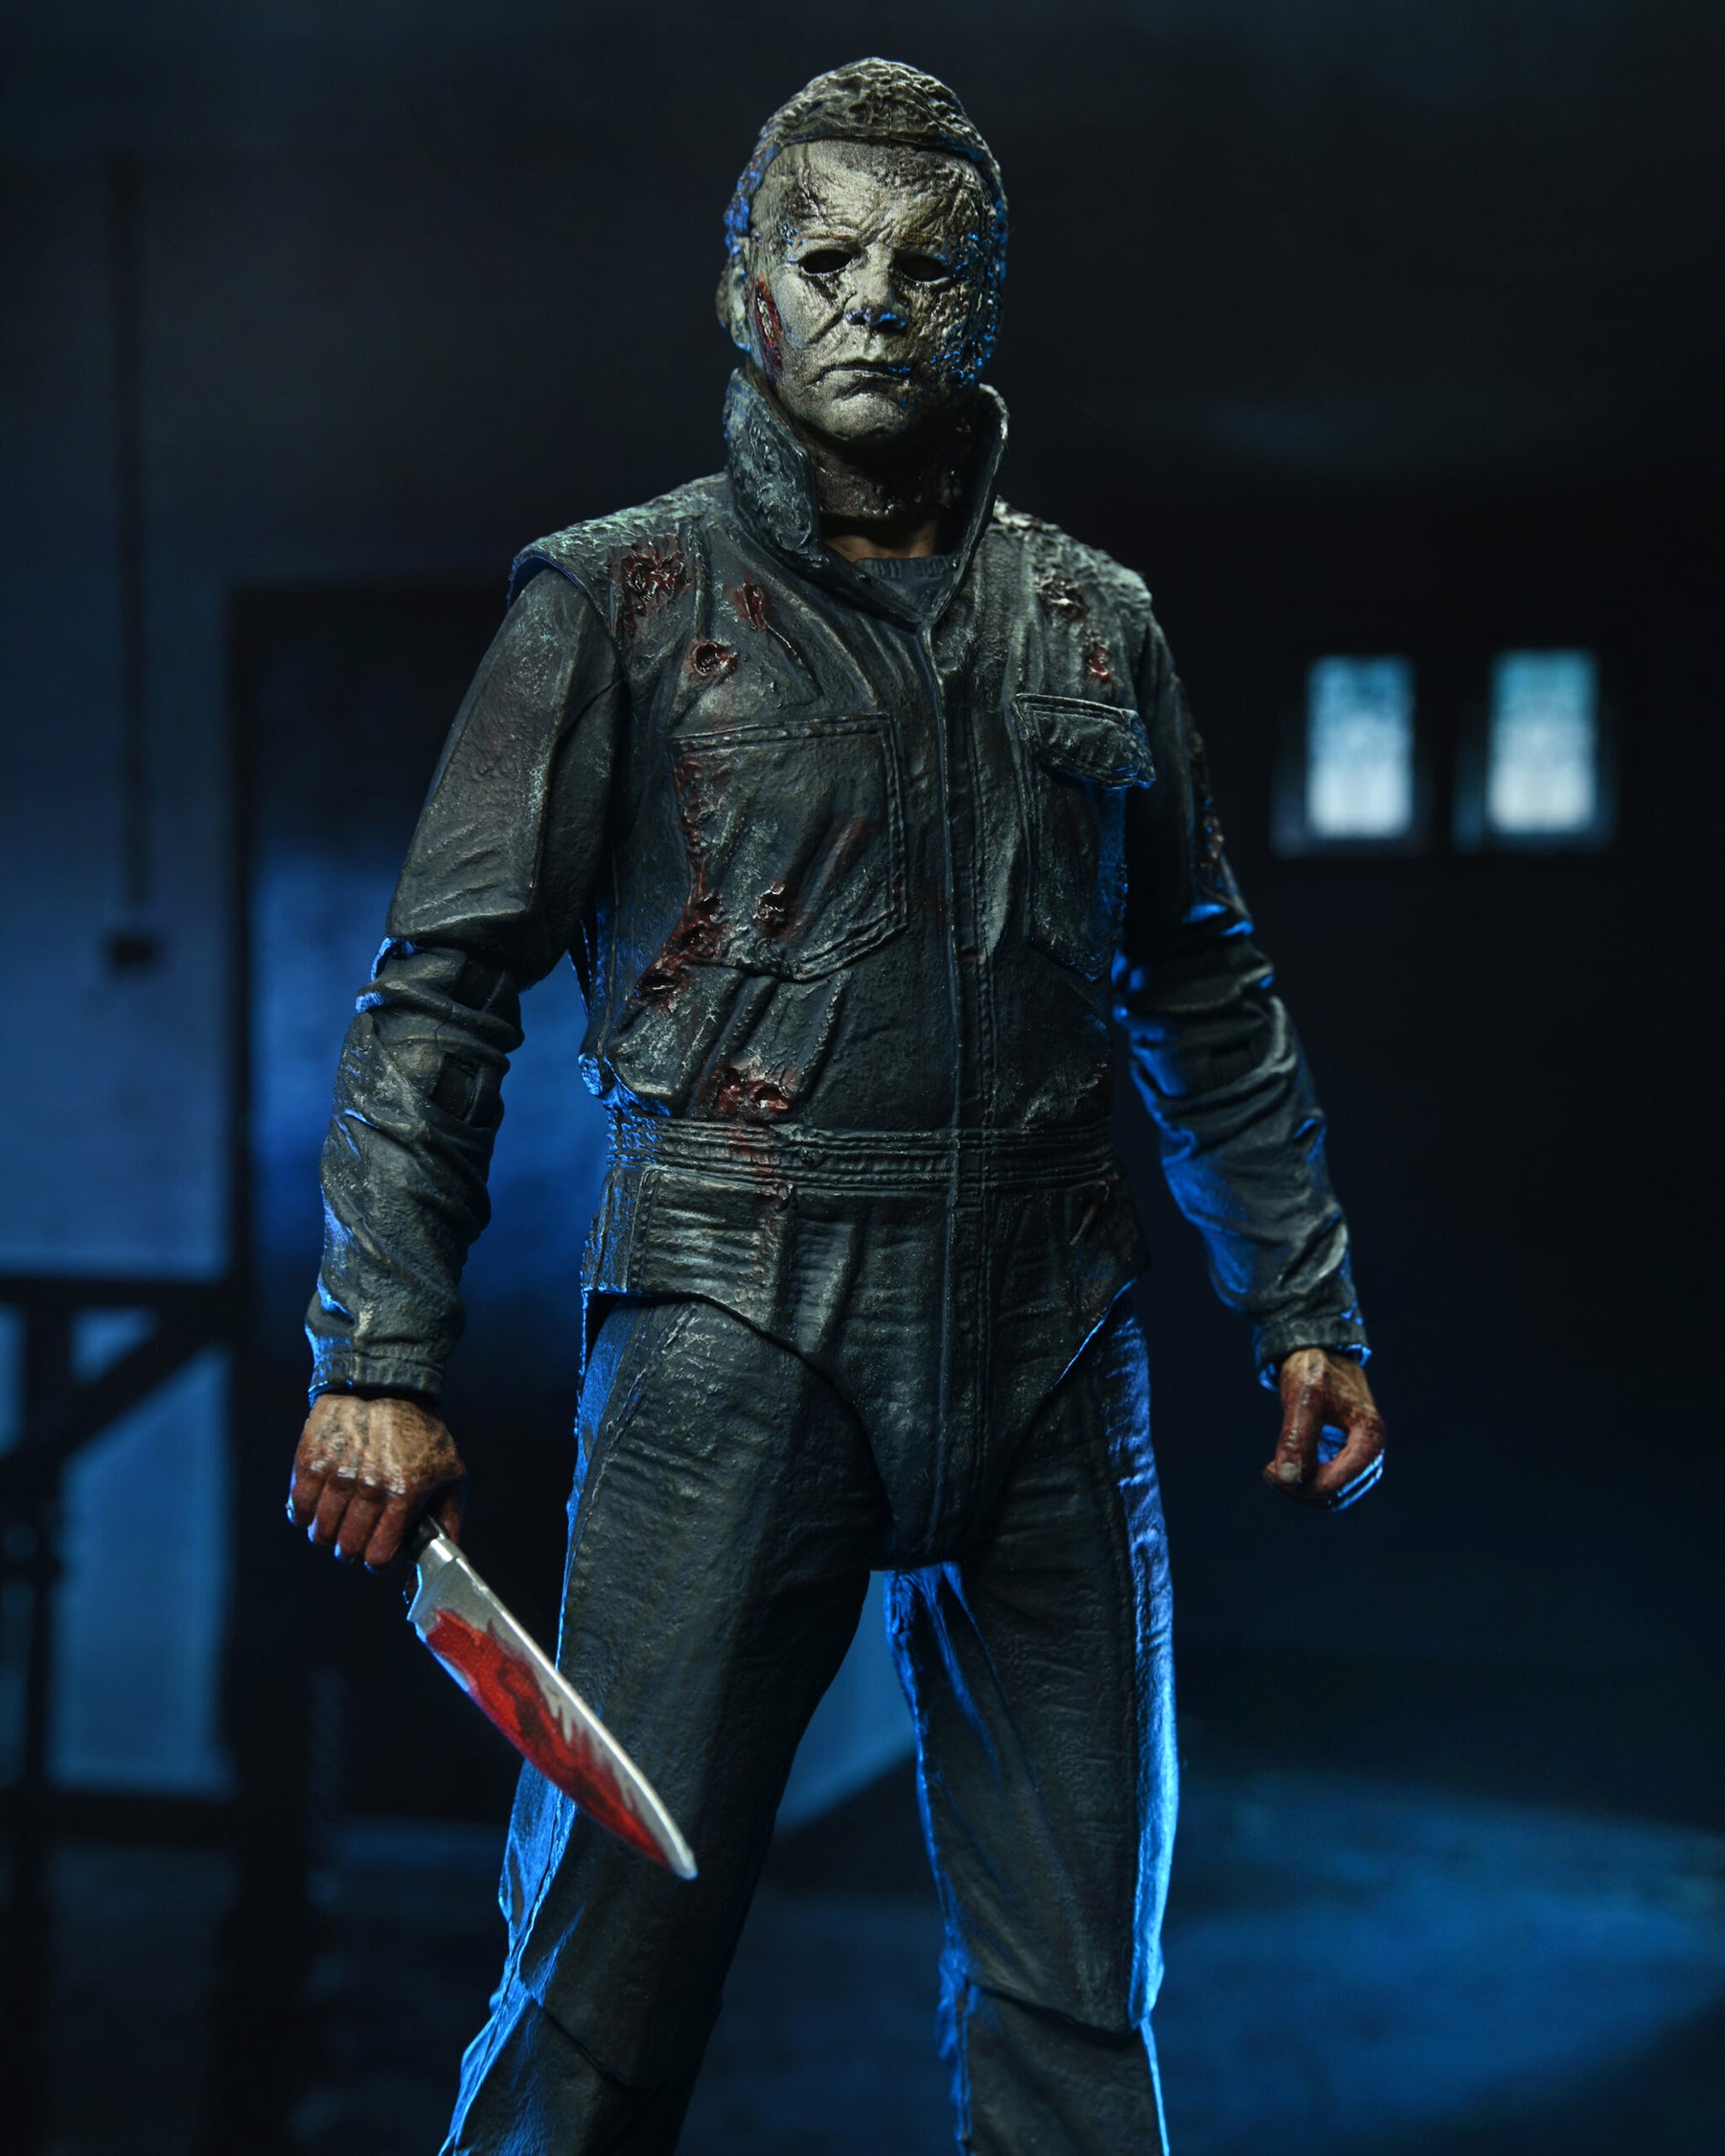 NECA - Halloween Ends - Ultimate Michael Myers 7" Action Figure (Pre-Order Ships October)